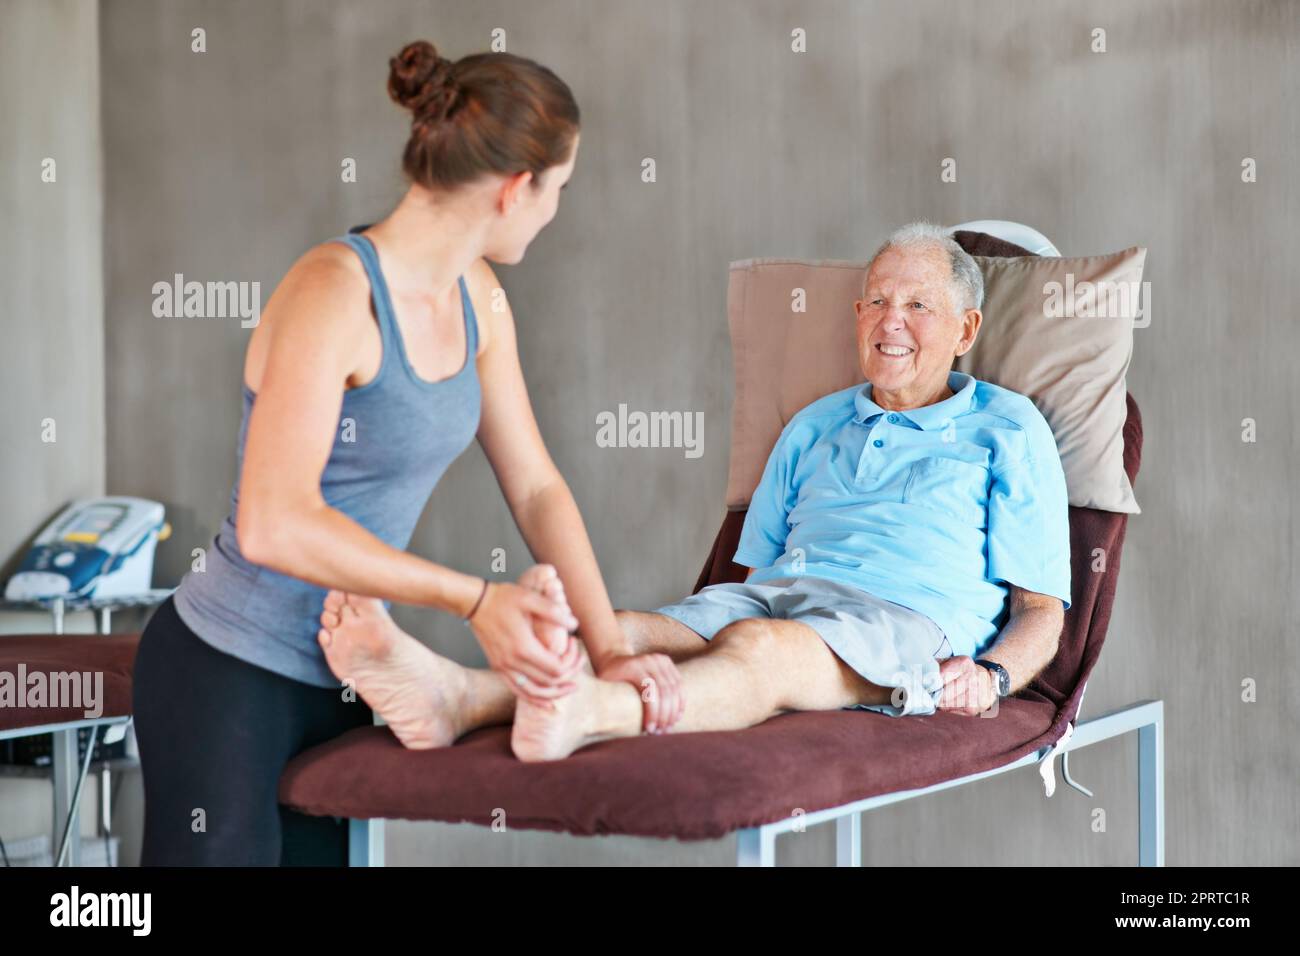 Helping her patients stay strong and healthy. a a physical therapist working with a senior man. Stock Photo